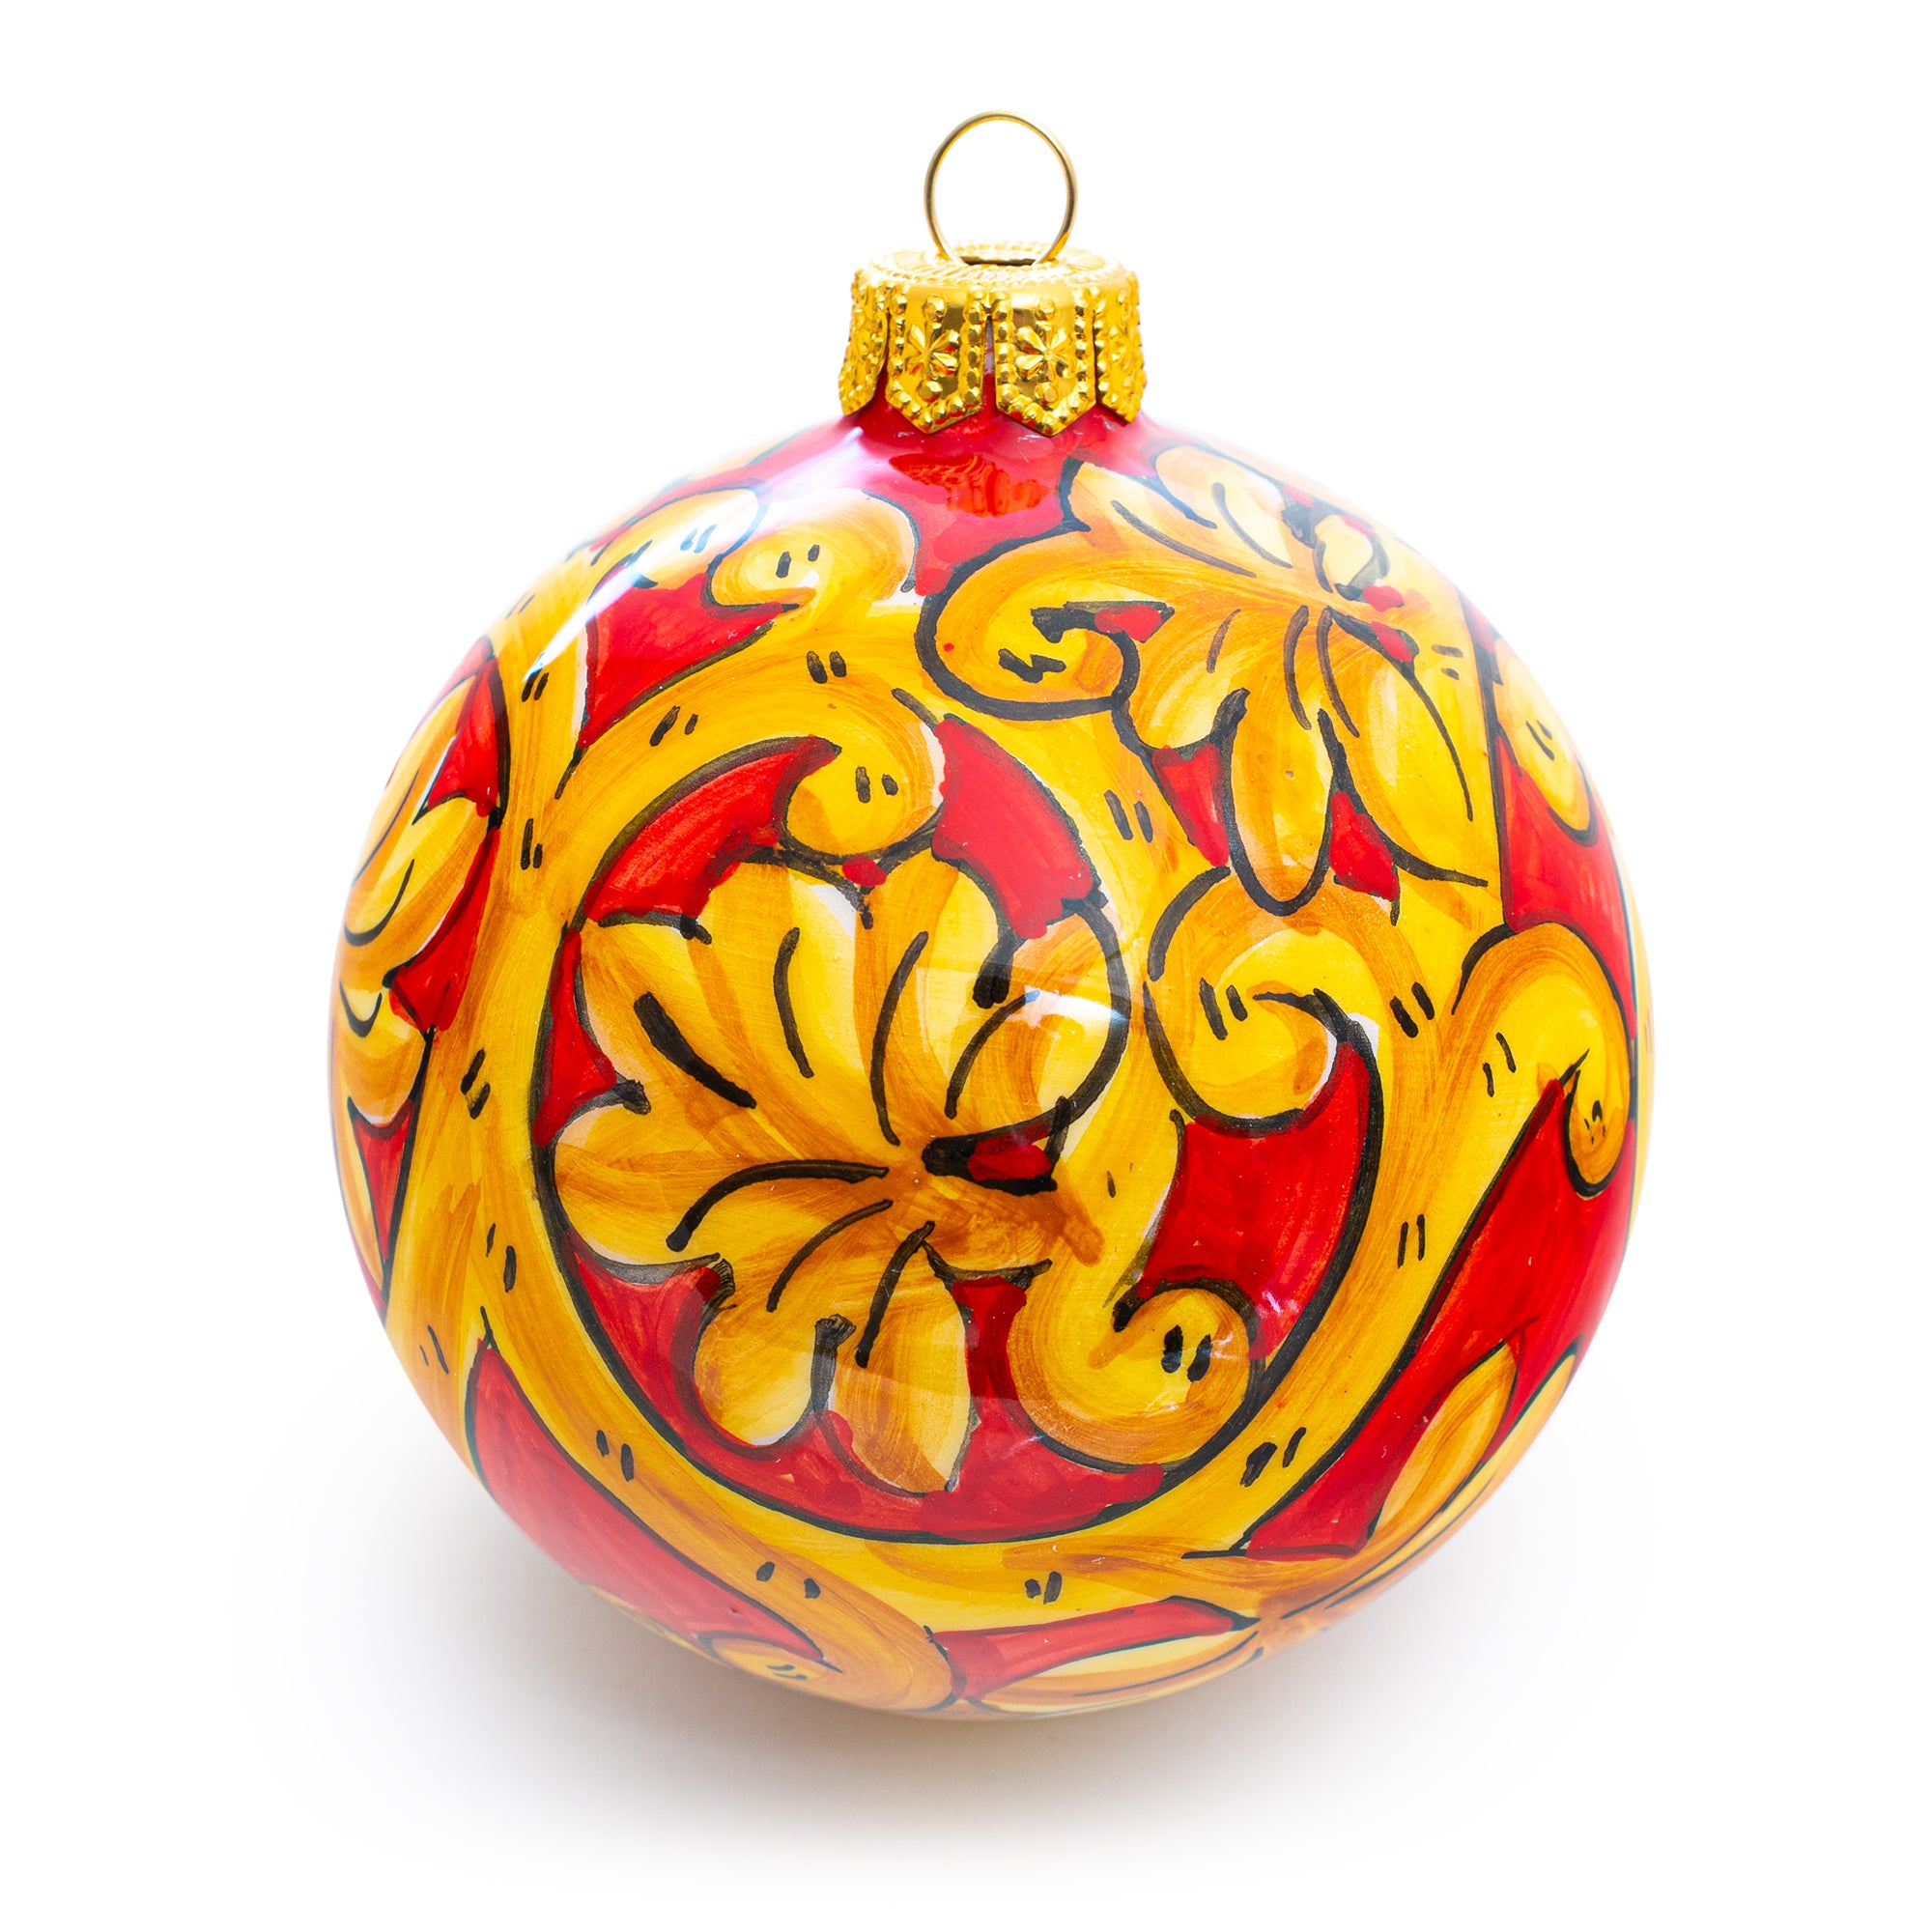 Pia's Ricamo Rosso Ornament - Set of 6, ceramics, pottery, italian design, majolica, handmade, handcrafted, handpainted, home decor, kitchen art, home goods, deruta, majolica, Artisan, treasures, traditional art, modern art, gift ideas, style, SF, shop small business, artists, shop online, landmark store, legacy, one of a kind, limited edition, gift guide, gift shop, retail shop, decorations, shopping, italy, home staging, home decorating, home interiors